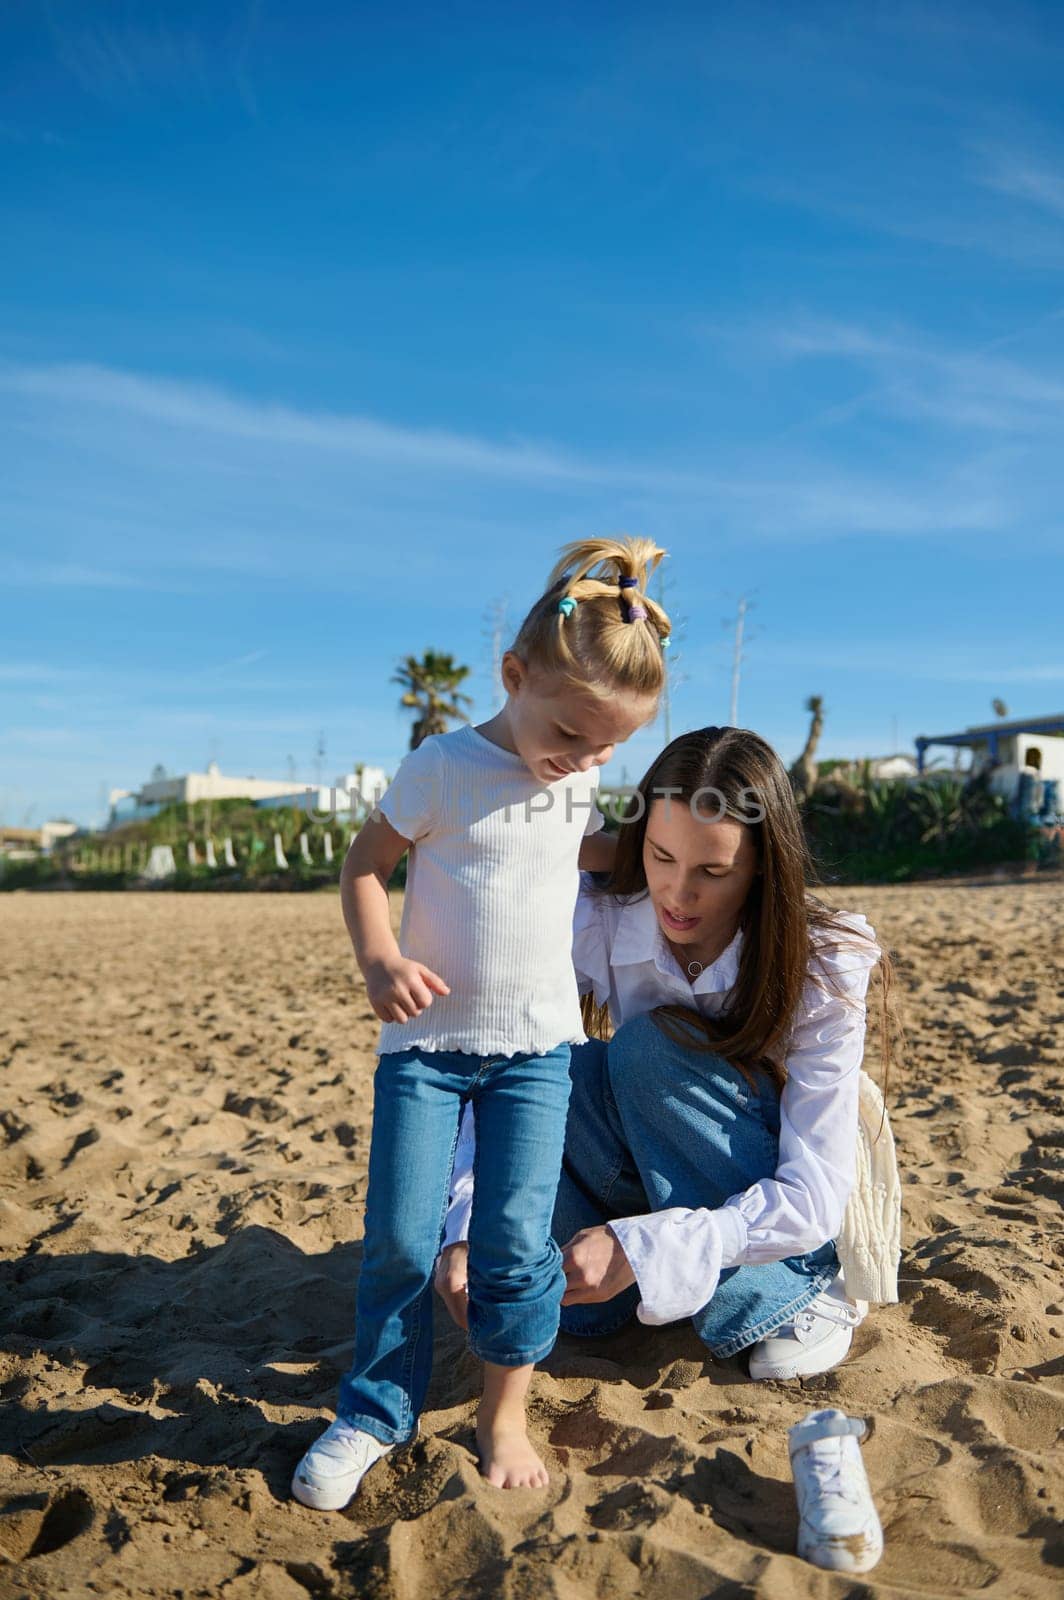 Happy mother and daughter playing together on the beach, building castles from the sand, enjoying nice time outdoor. People. Family relationships. Lifestyle. Maternity and childhood concept